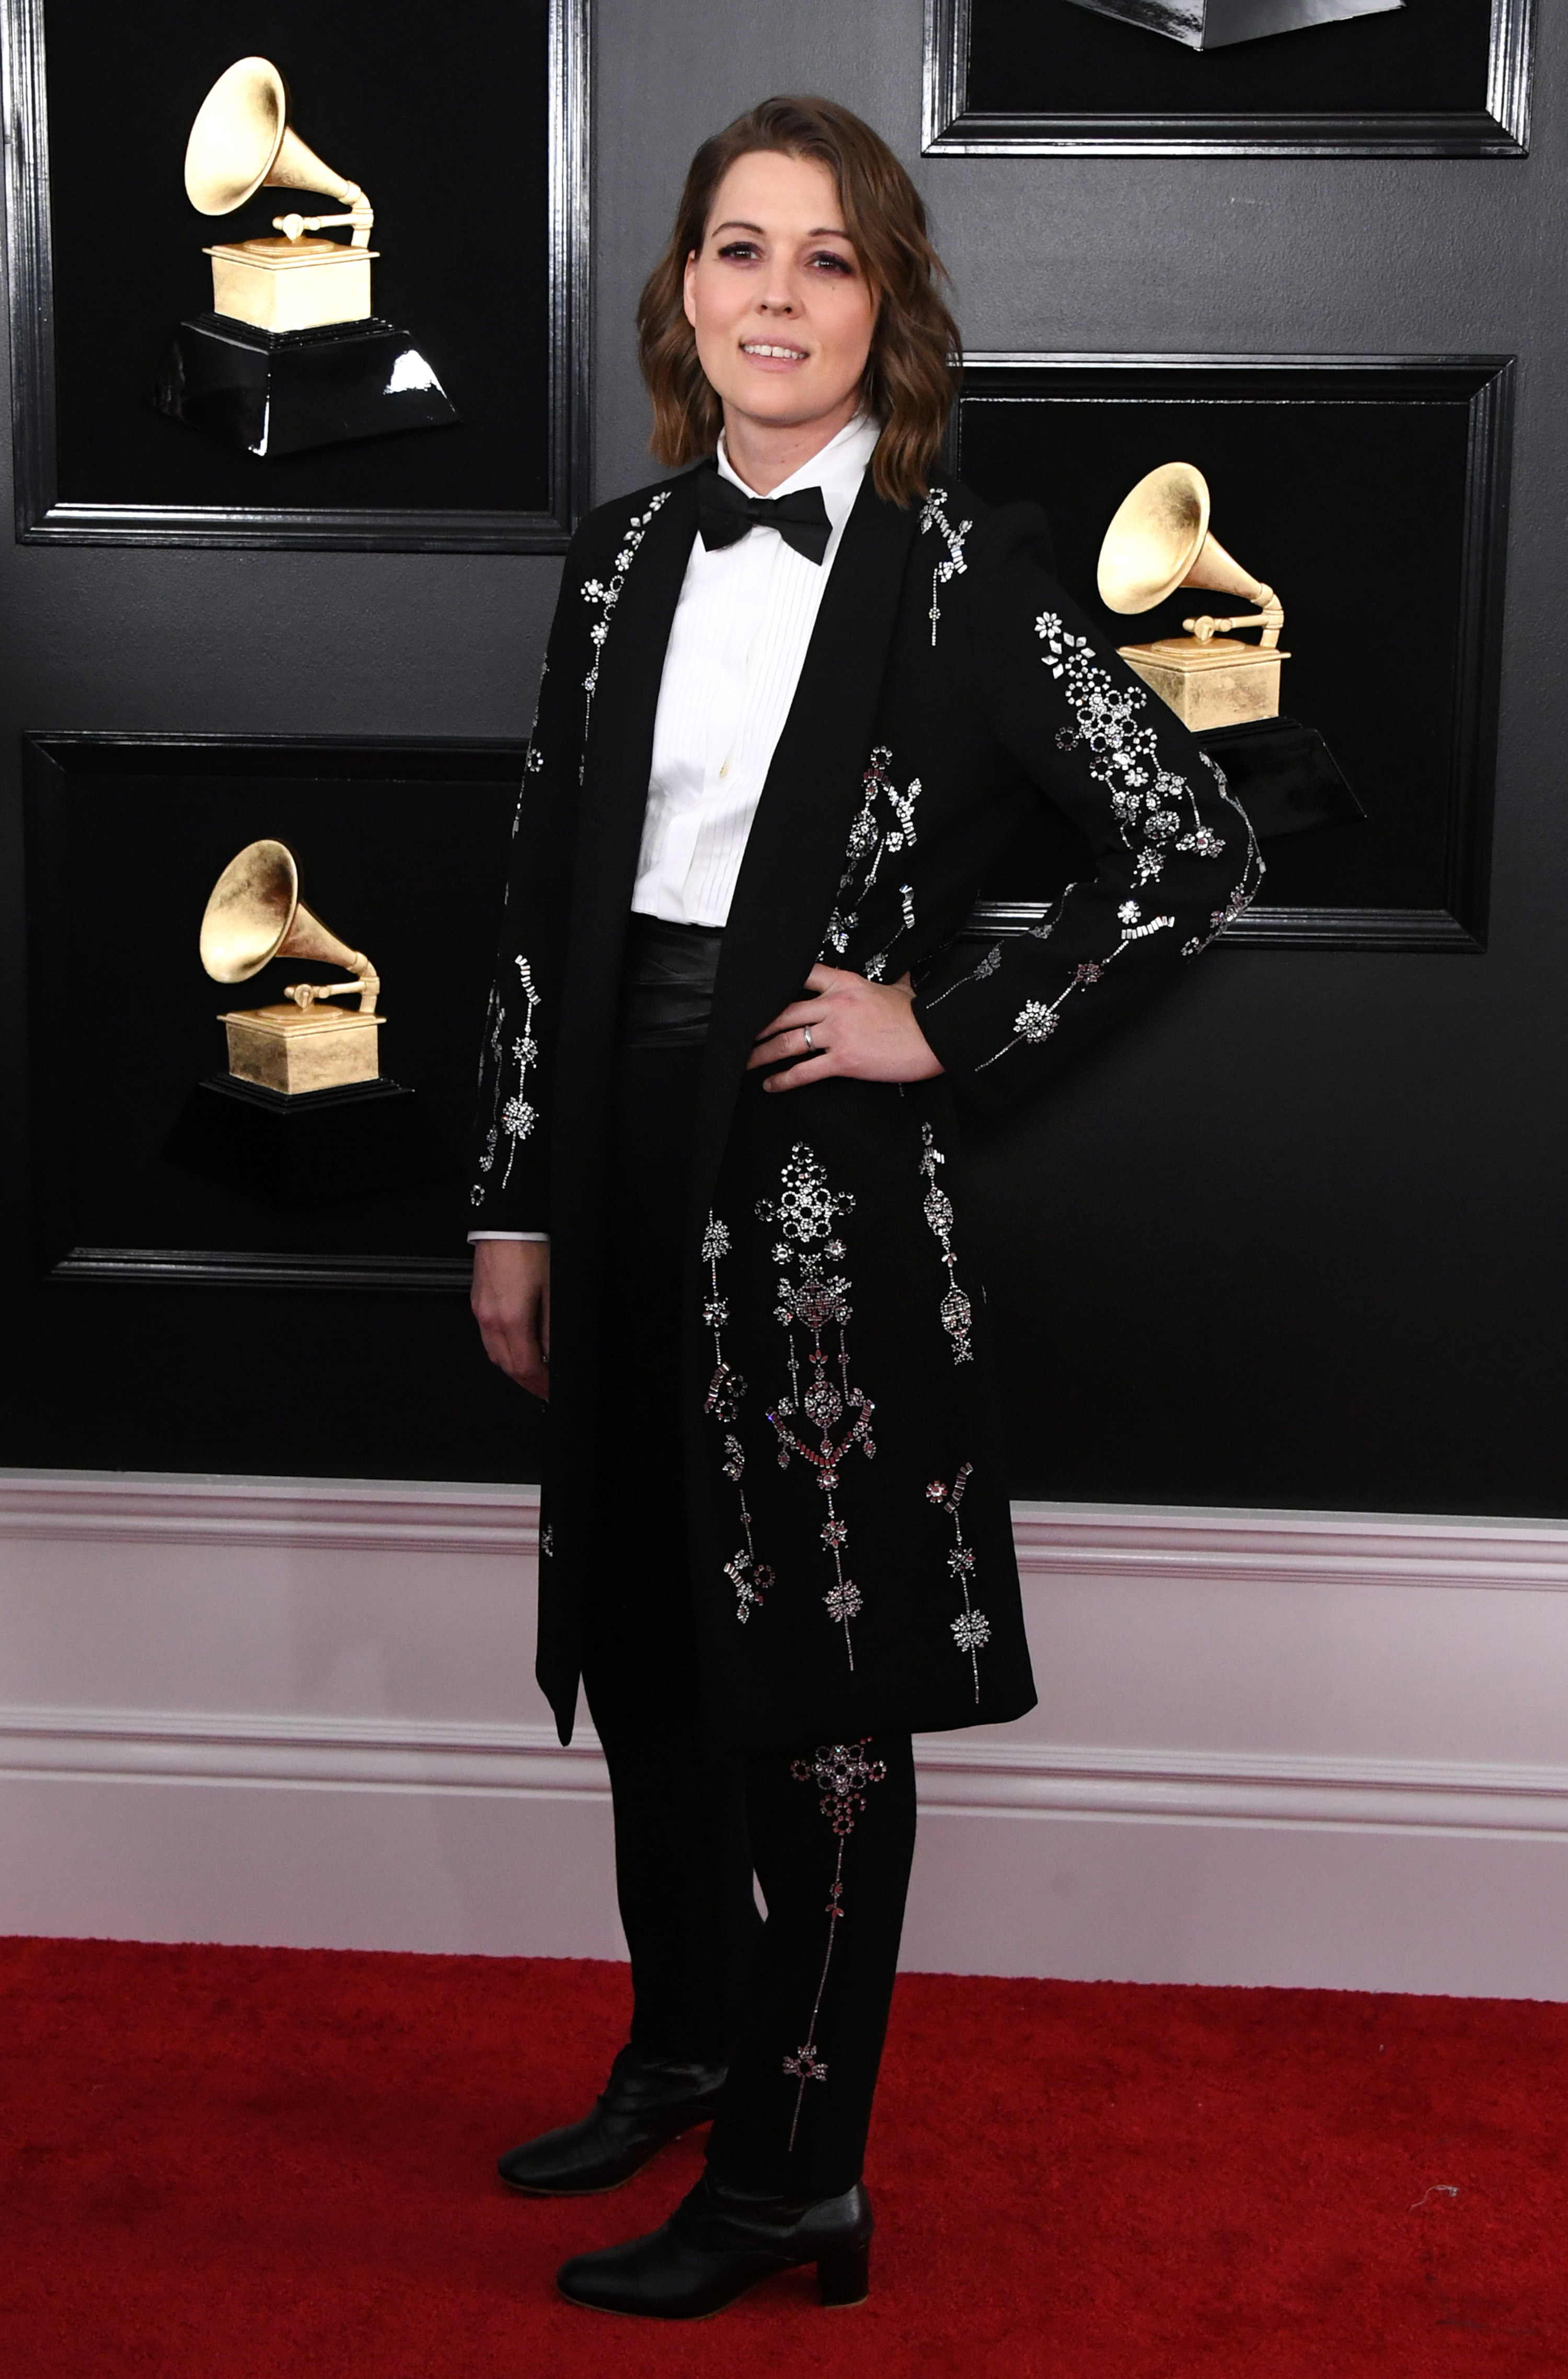 Brandi Carlile at the 61st Annual GRAMMY Awards. She wears a long suit jacket to her knees, which is embellished with silver beaded designs. This continues down the side of her trousers, which she wears with a white shirt, black bow tie and black boots.